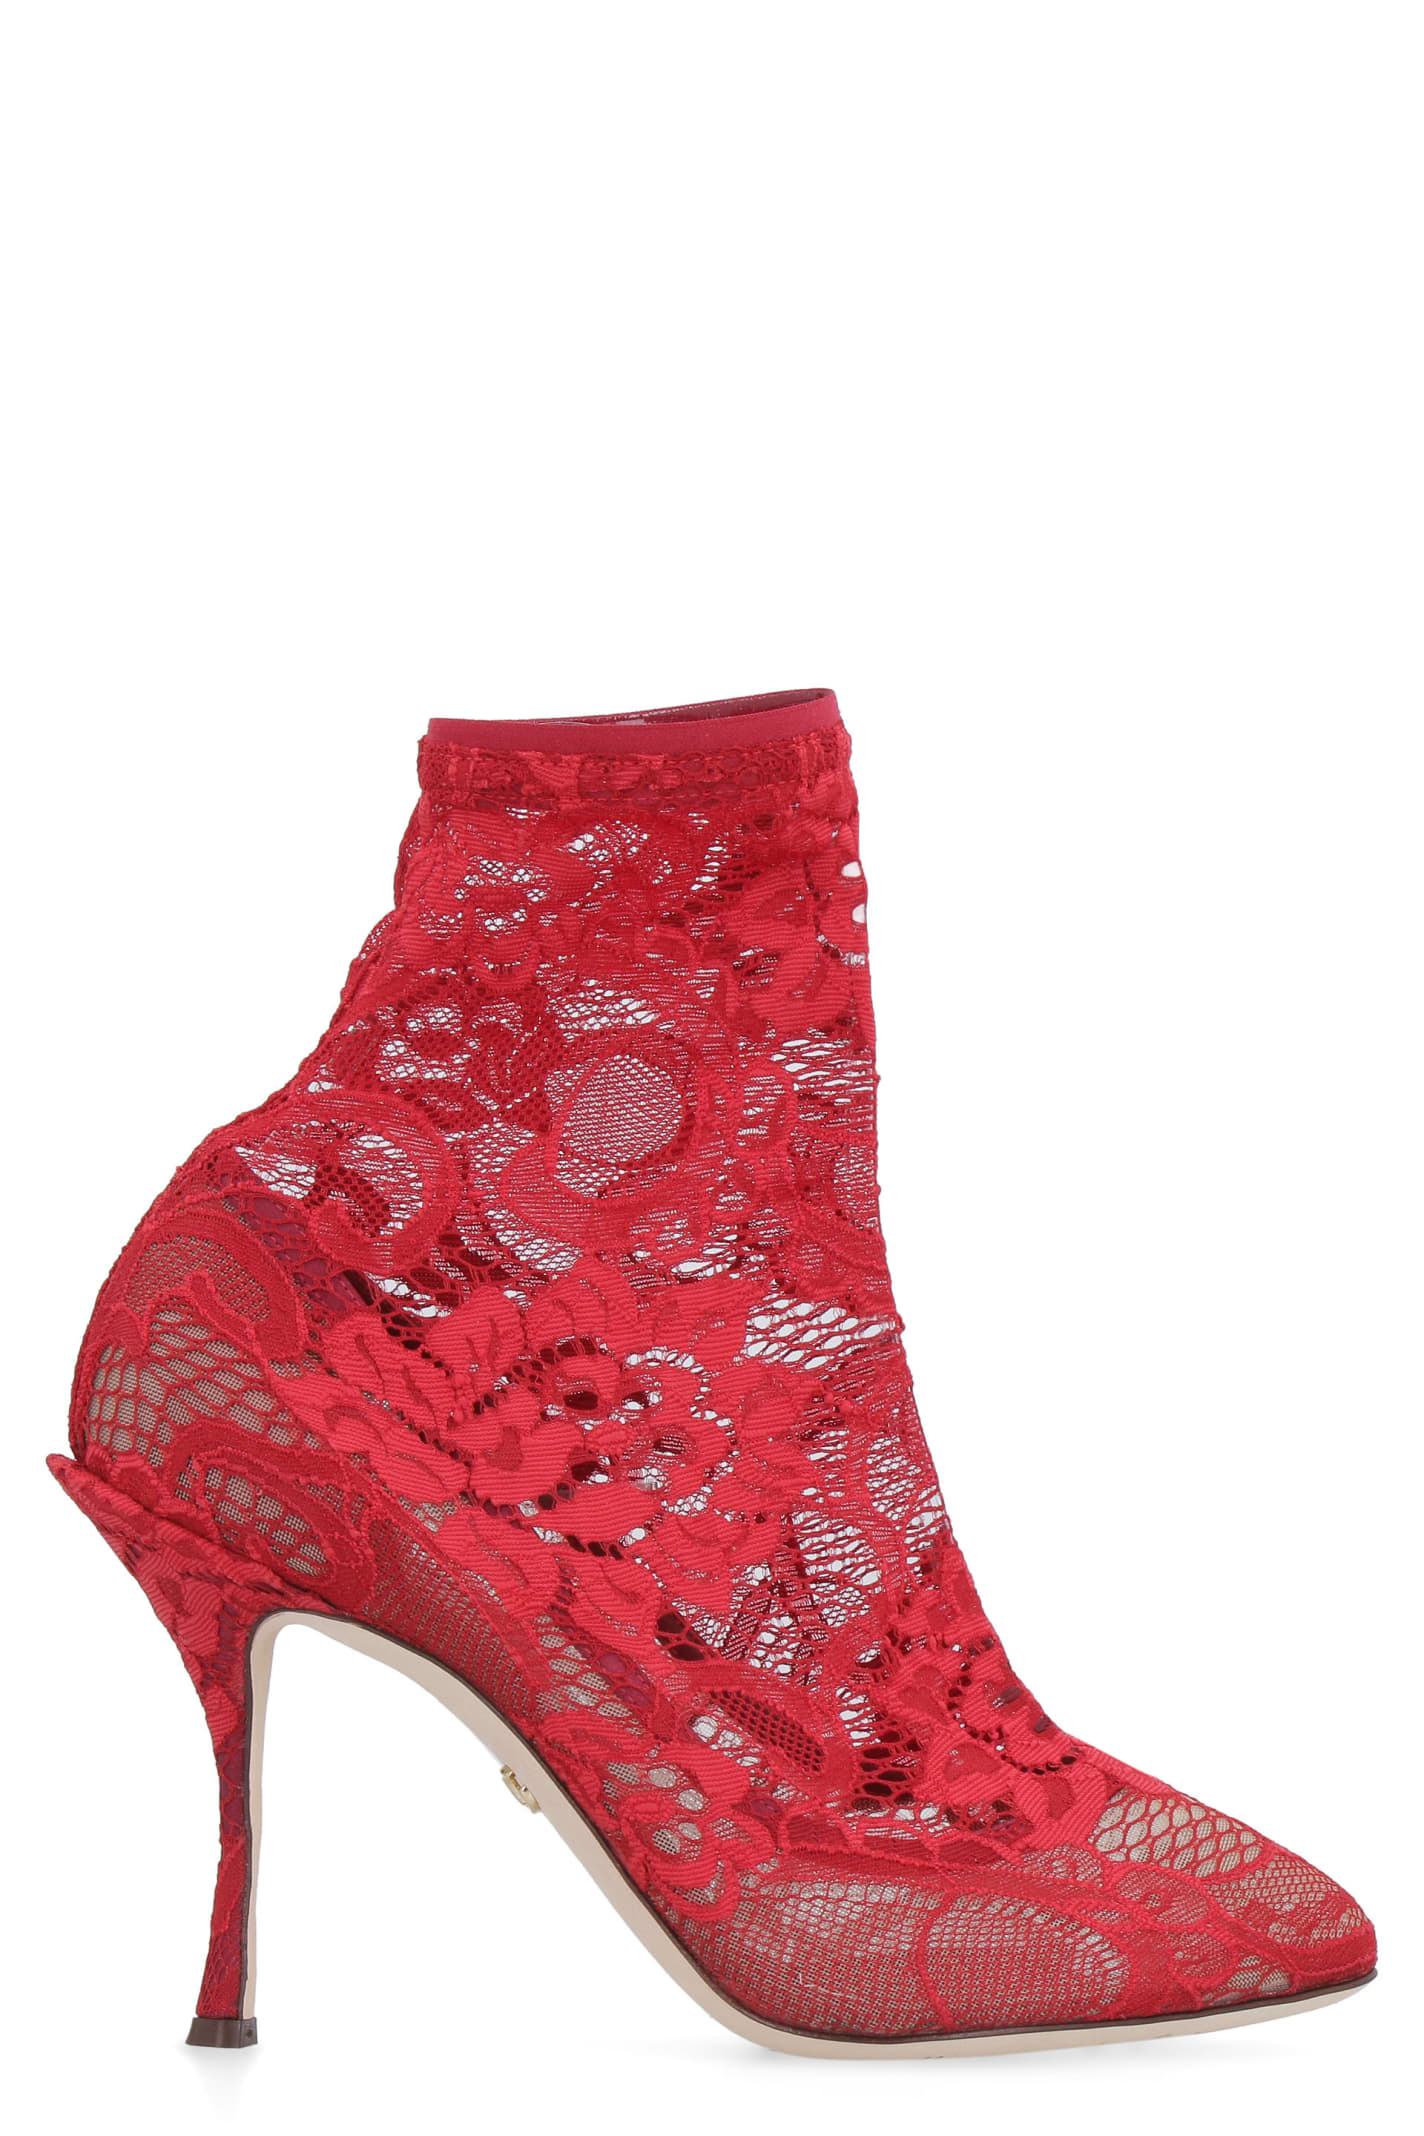 Buy Dolce & Gabbana Stretch Lace Ankle Boots online, shop Dolce & Gabbana shoes with free shipping